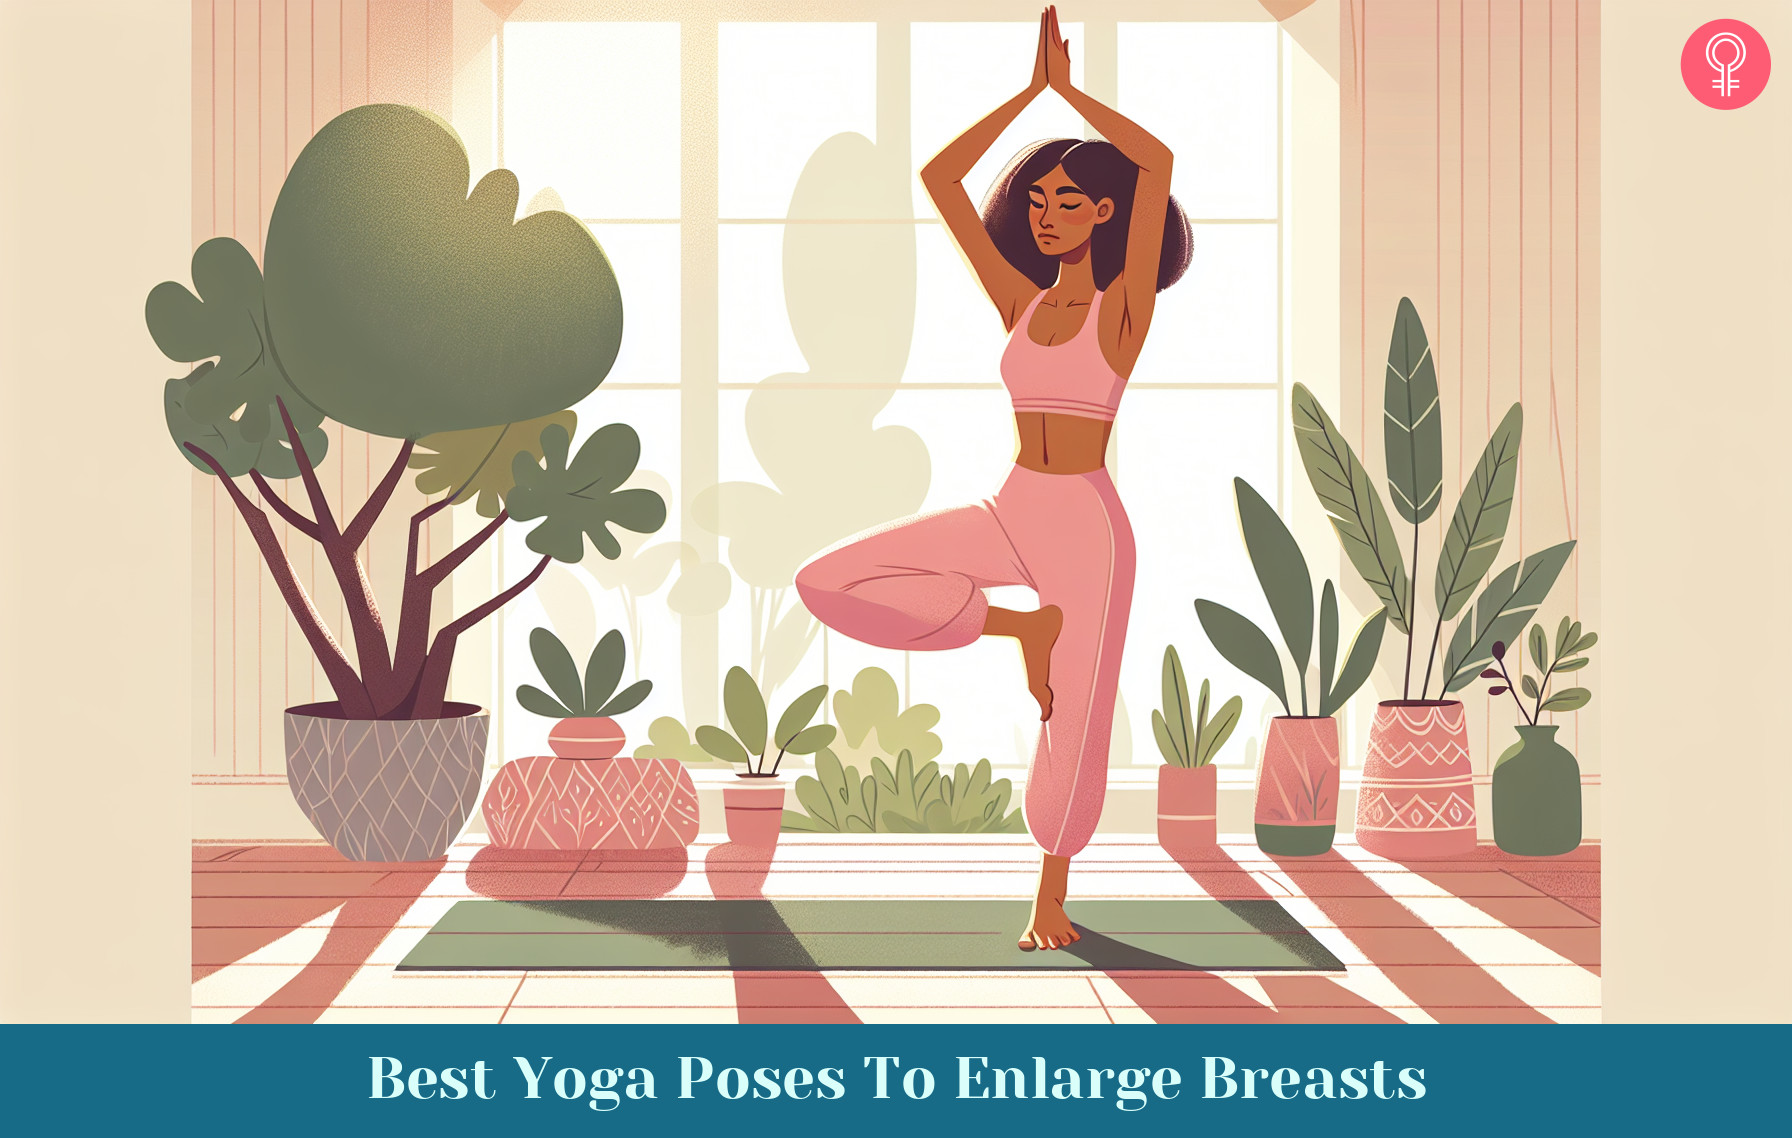 7 Best Yoga Poses To Enlarge Breasts